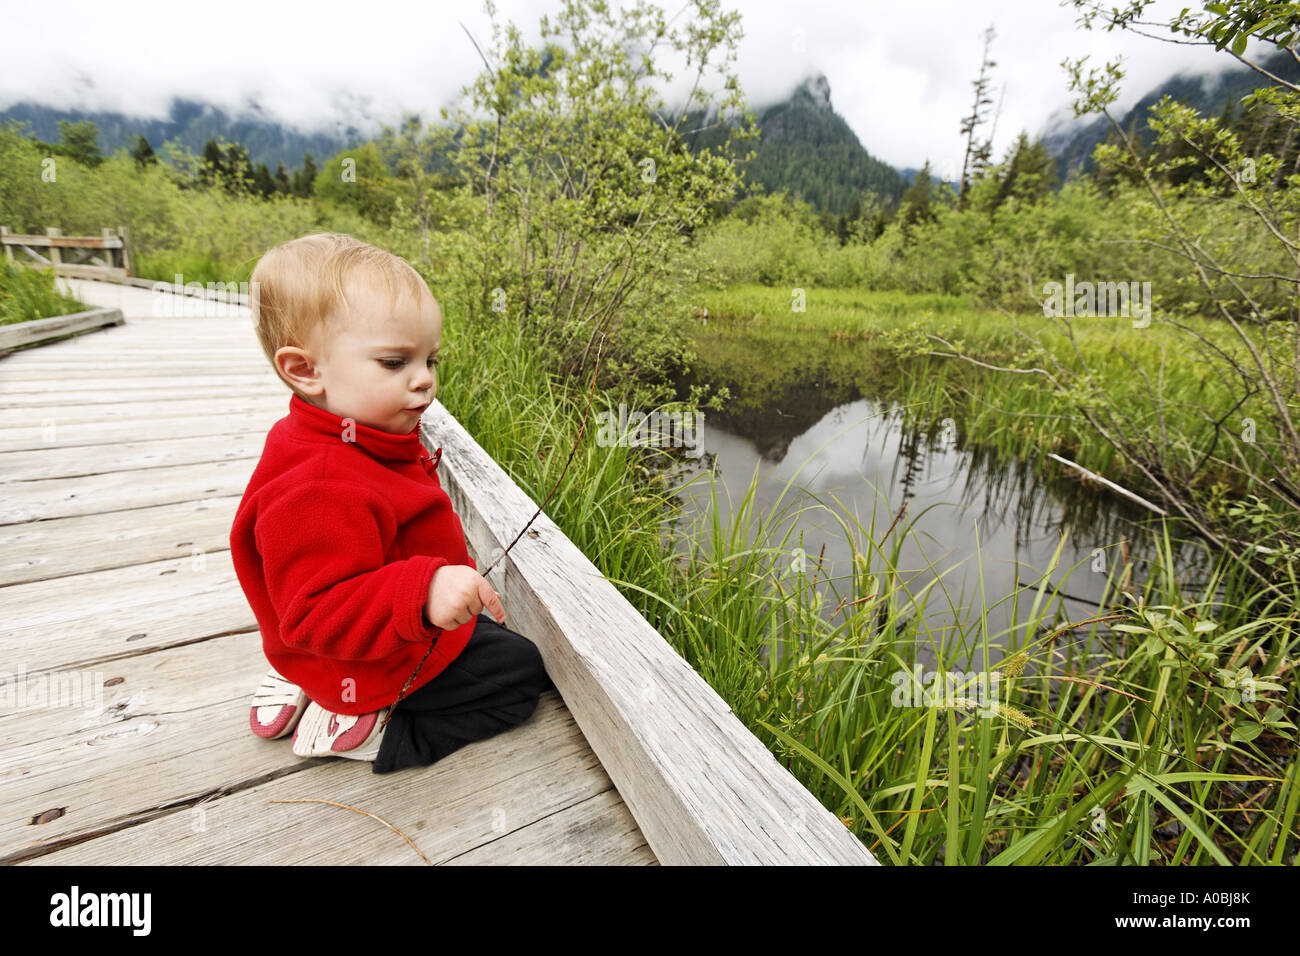 Young girl sitting on edge of wooden boardwalk trail with twigs Big Four Ice Caves Trail Cascade Mountains Washington USA Stock Photo